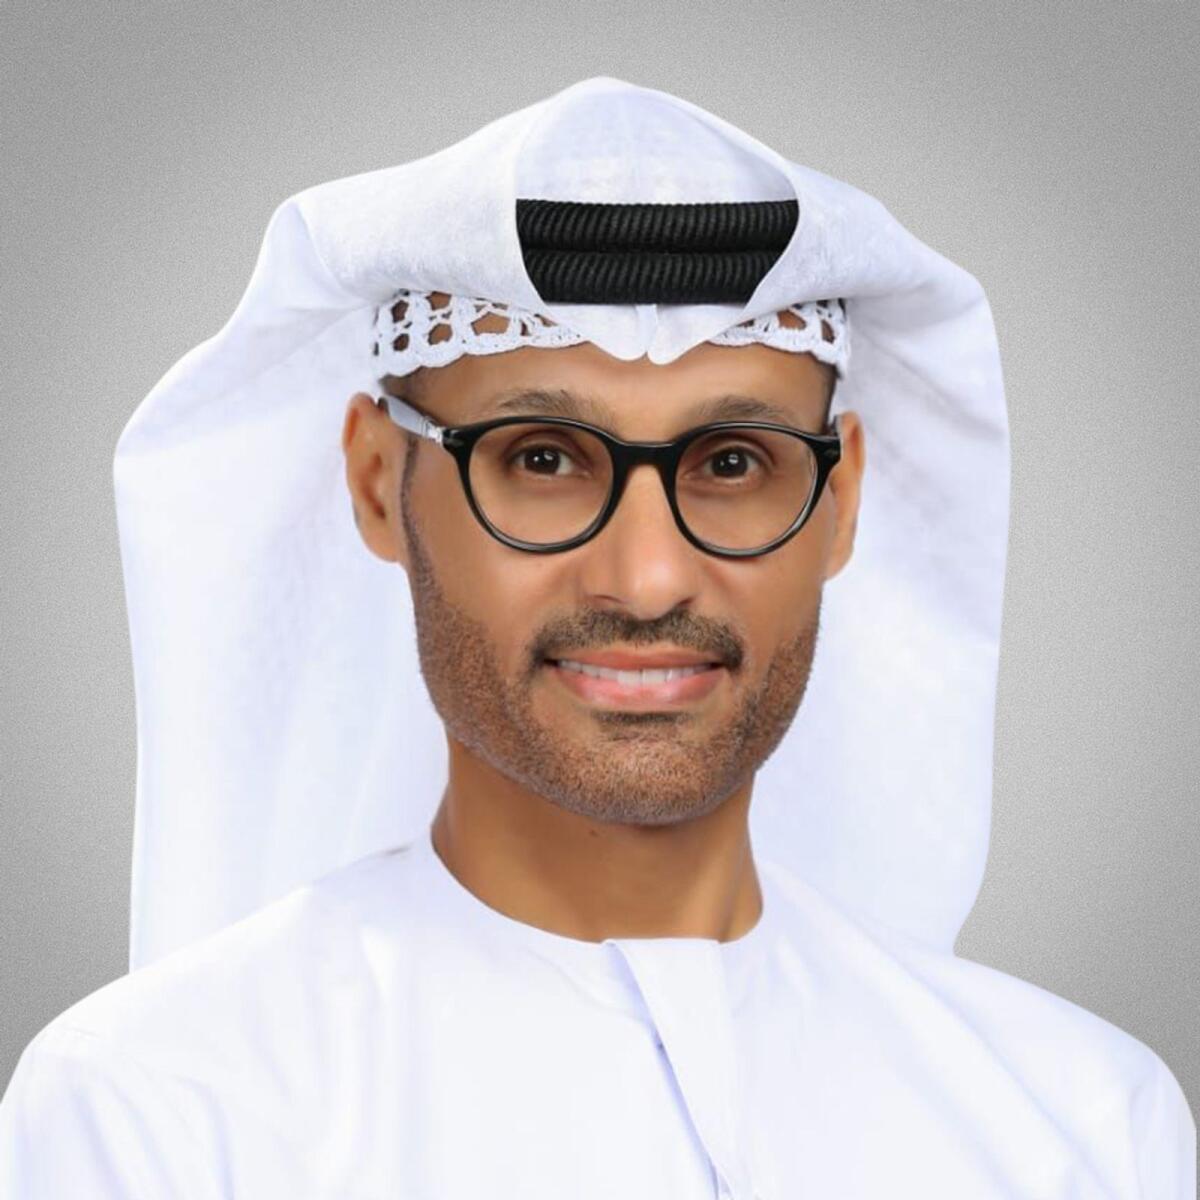 Dr. Mohamed Al Kuwaiti, head of cyber security for the UAE government